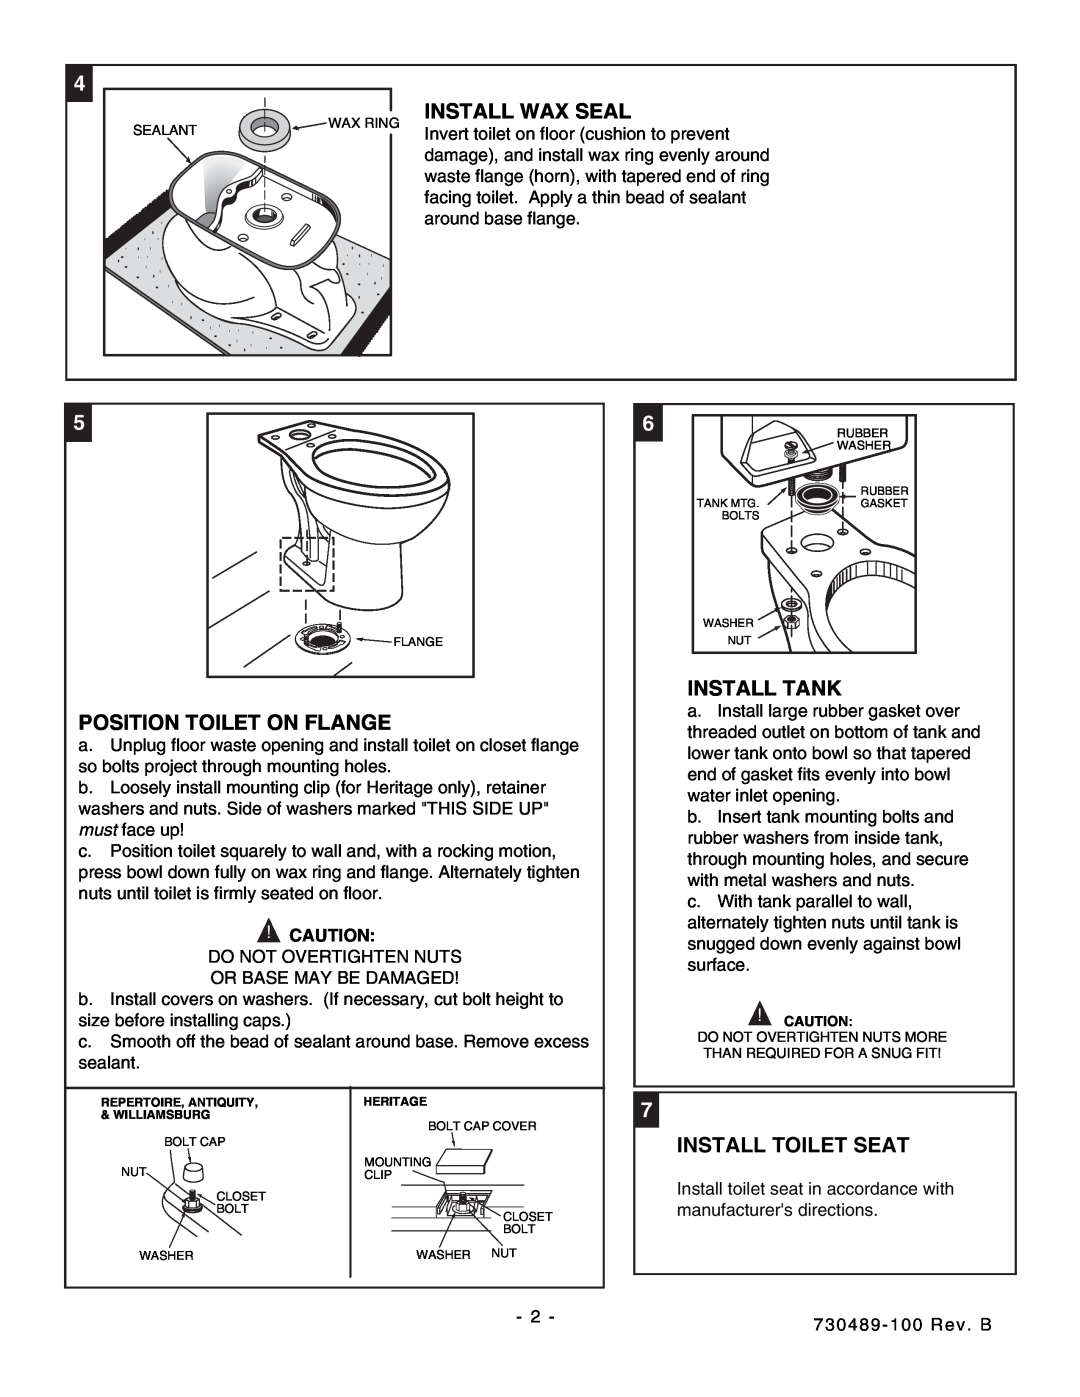 American Standard 2264.702 dimensions Install Wax Seal, Install Tank, Position Toilet On Flange, Install Toilet Seat 